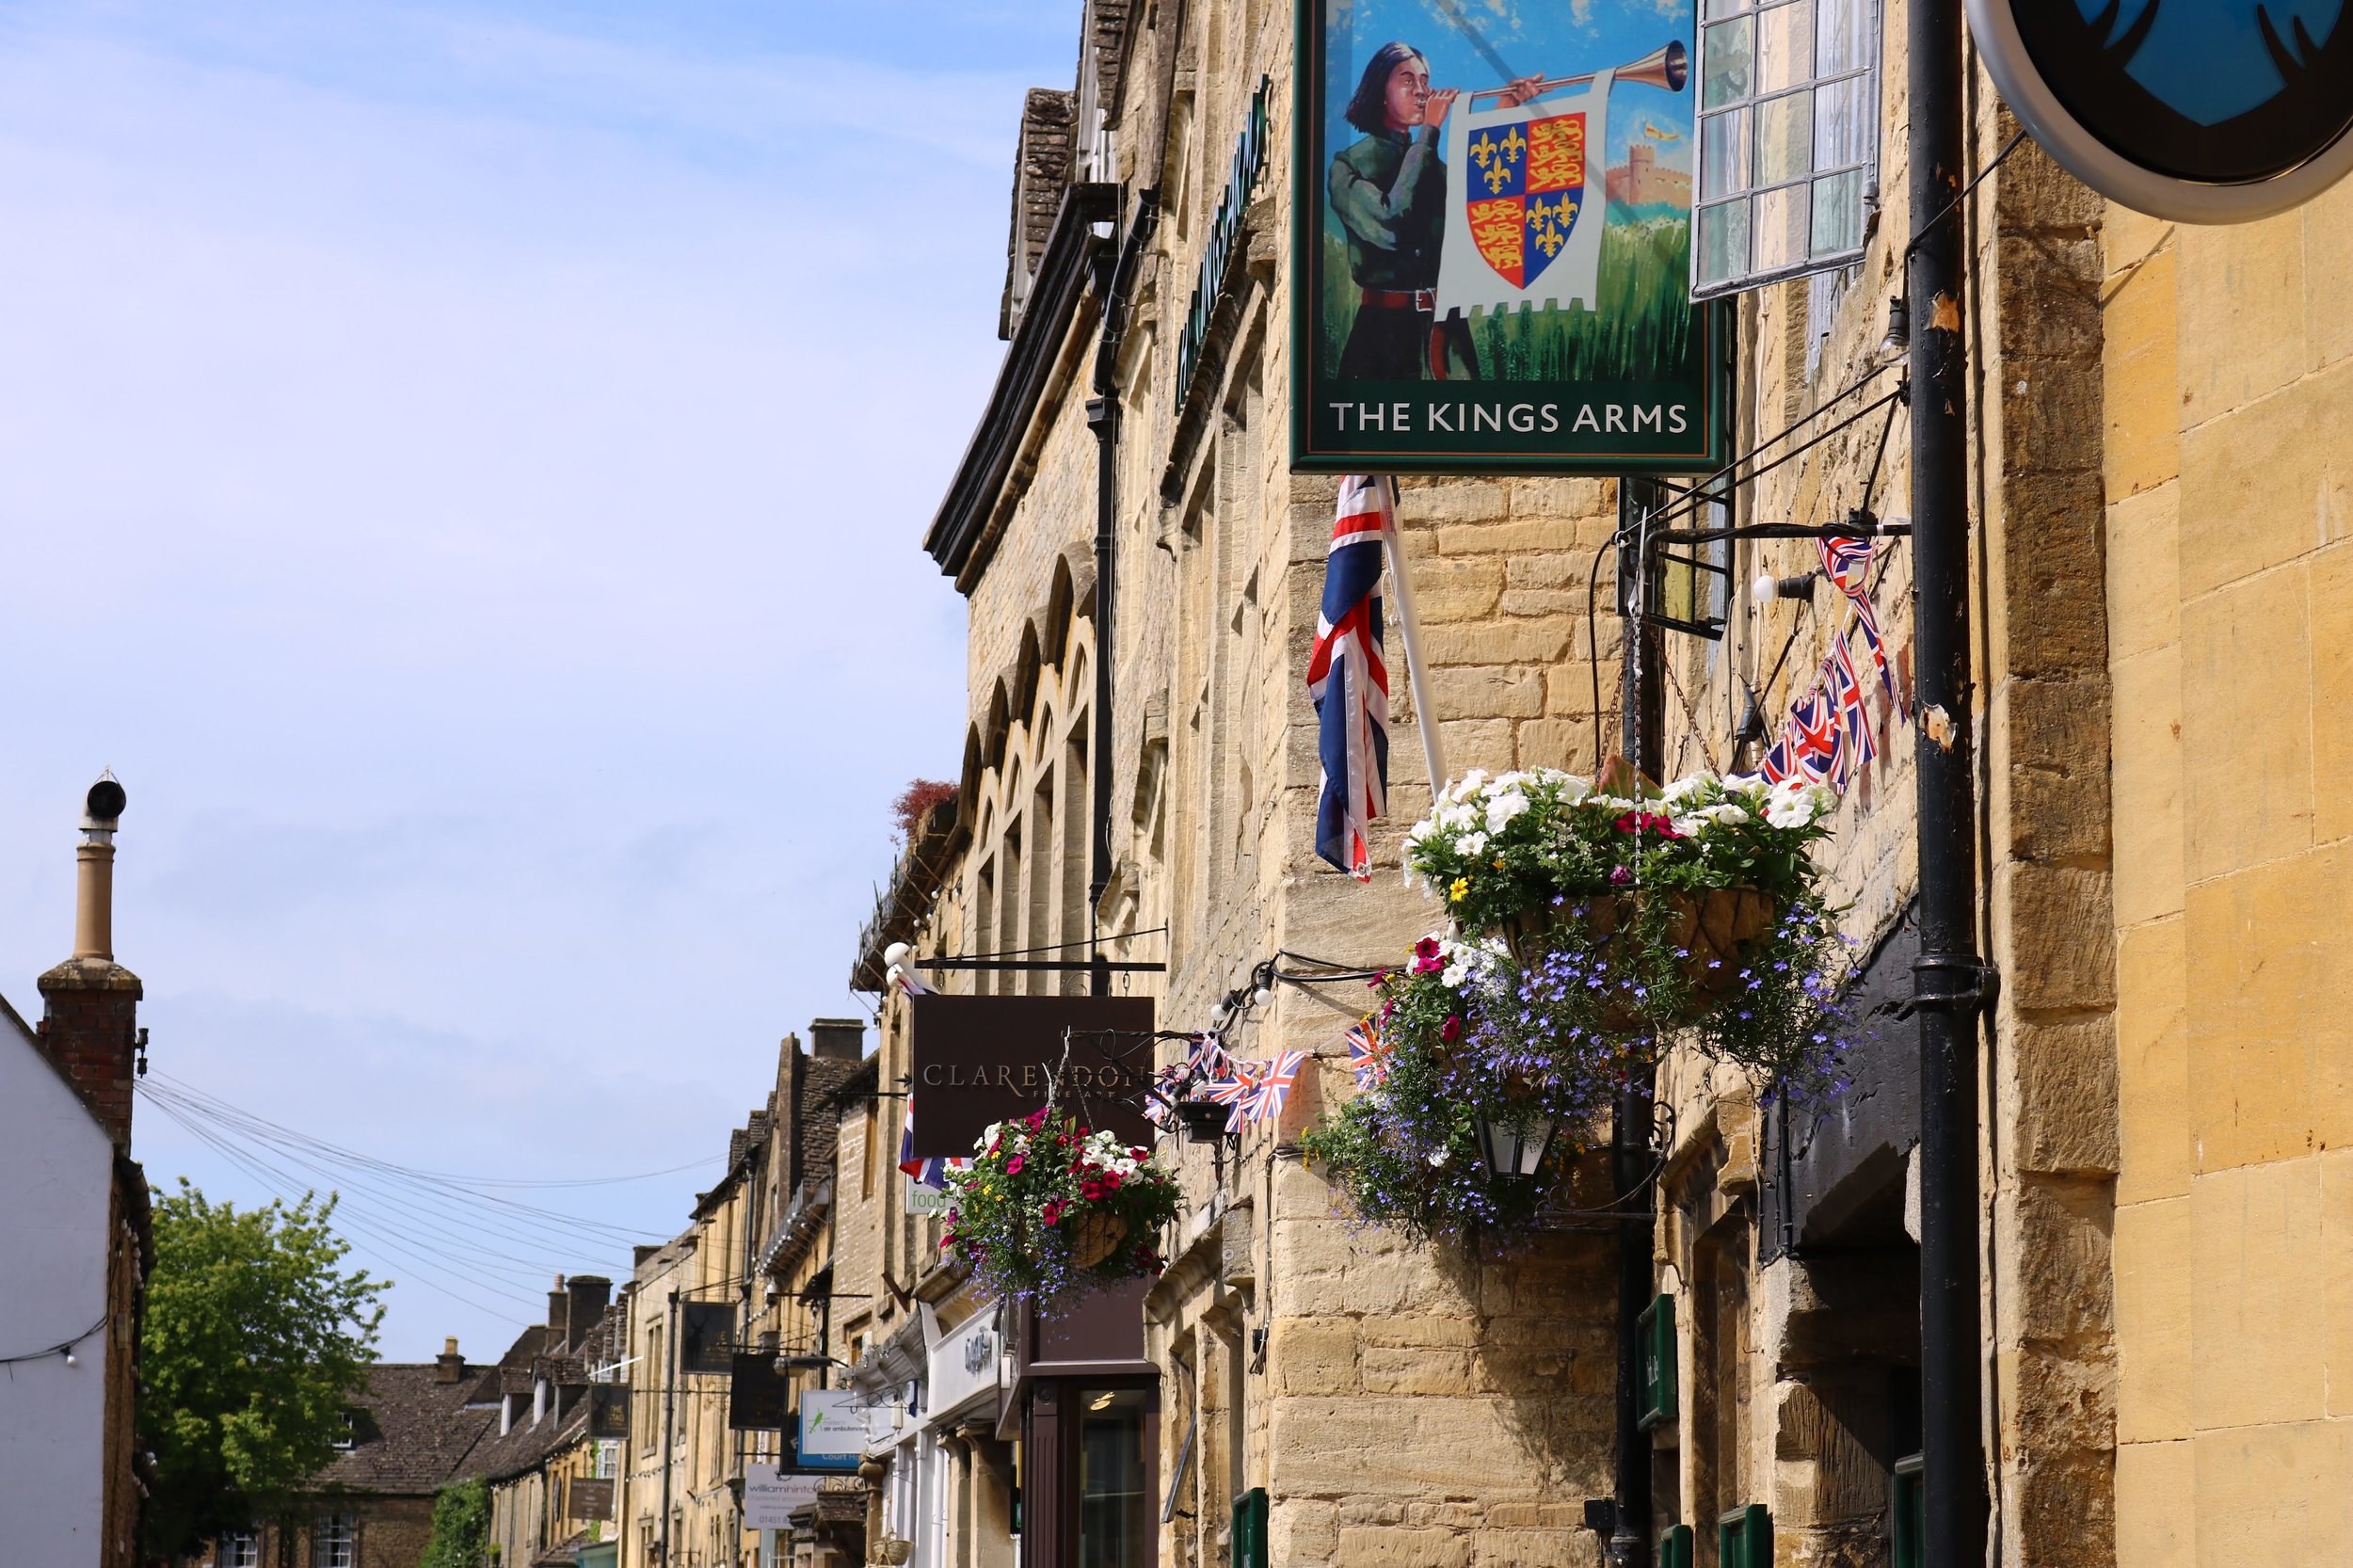 Stow on the Wold High Street